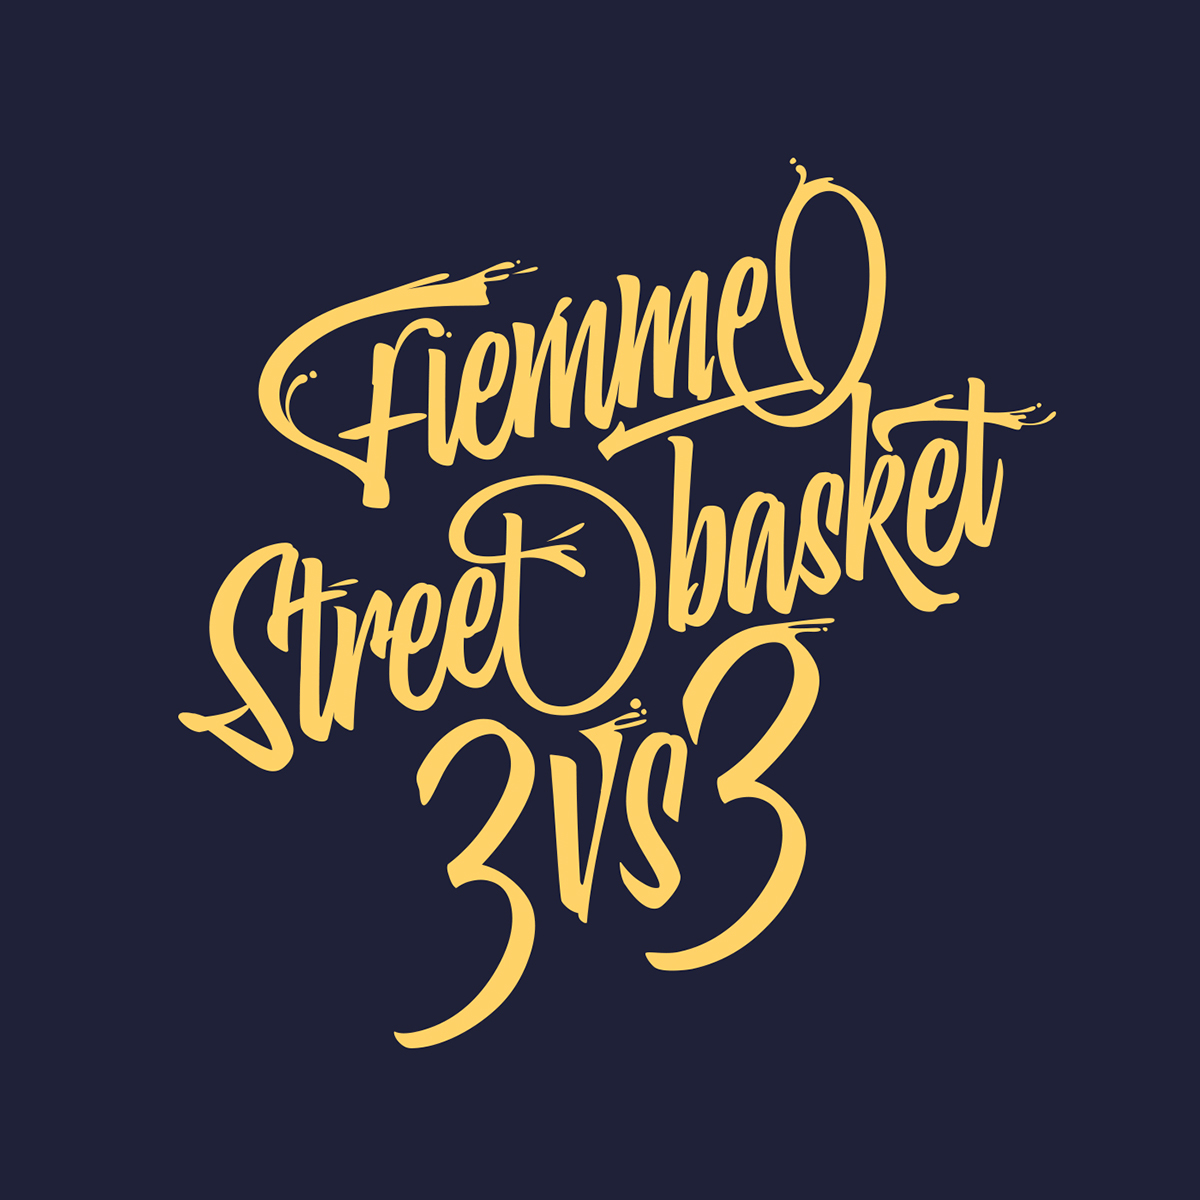 poster lettering basket Tournament Streetball party drinks Food  colors shapes tee